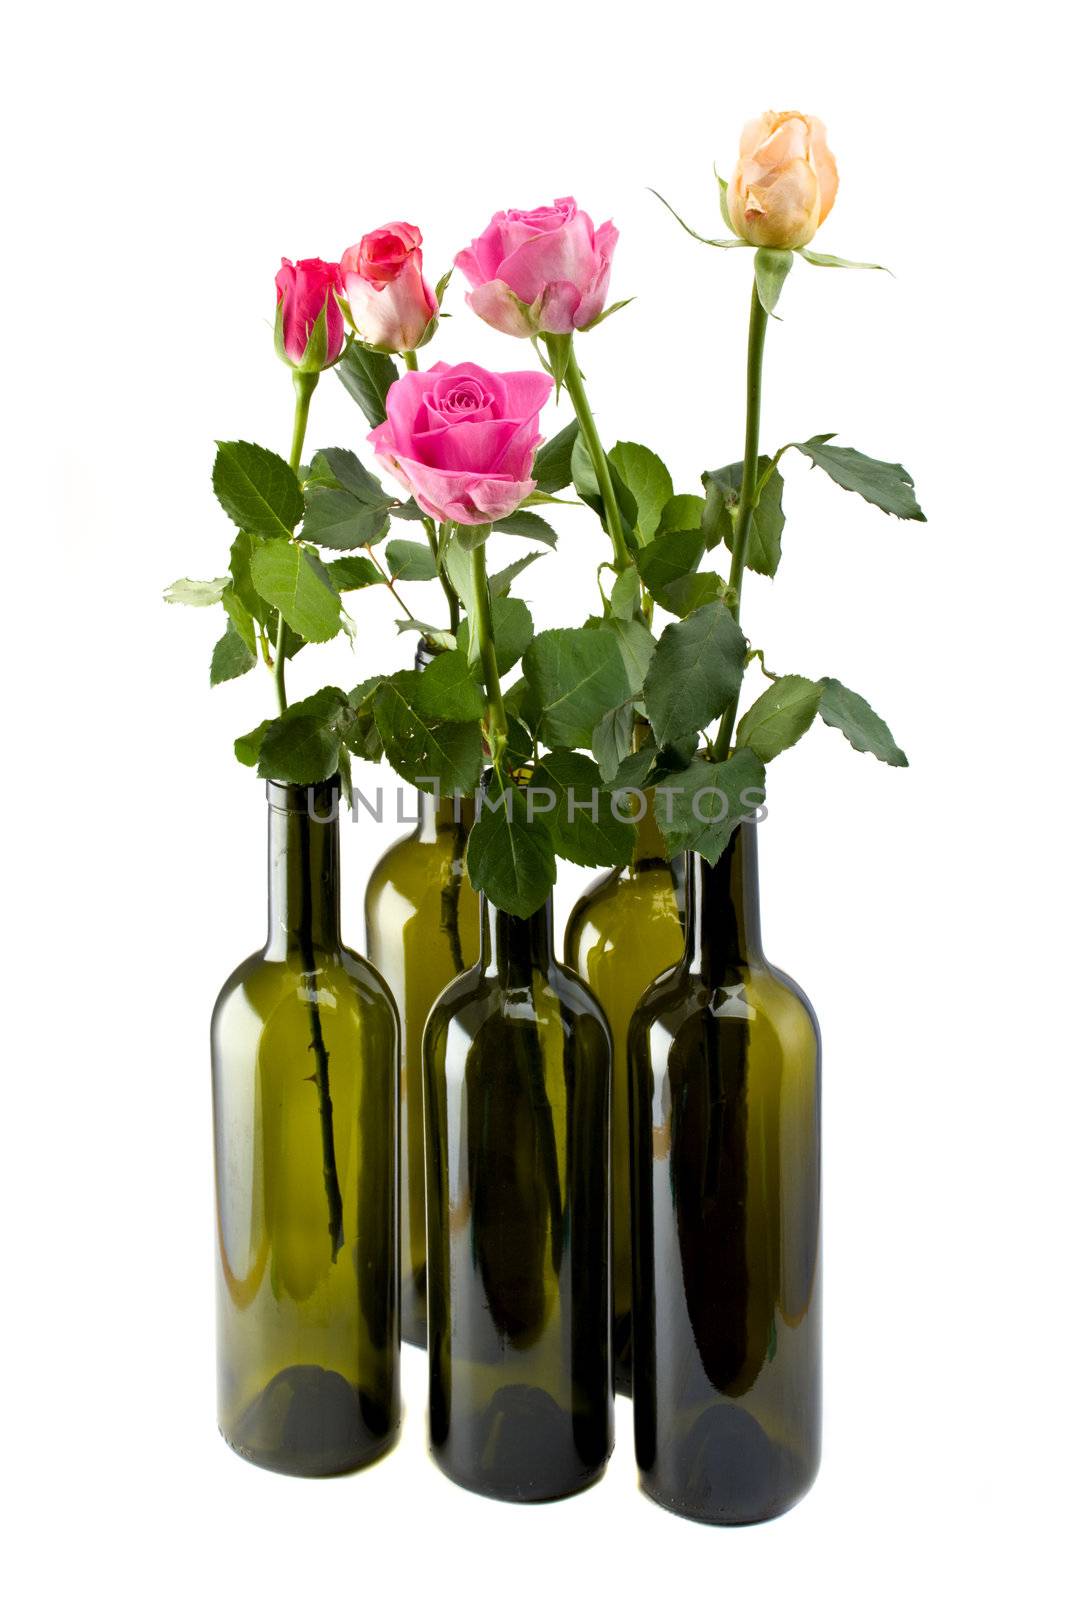 colorful roses in six empty wine bottles isolated on white background by bernjuer